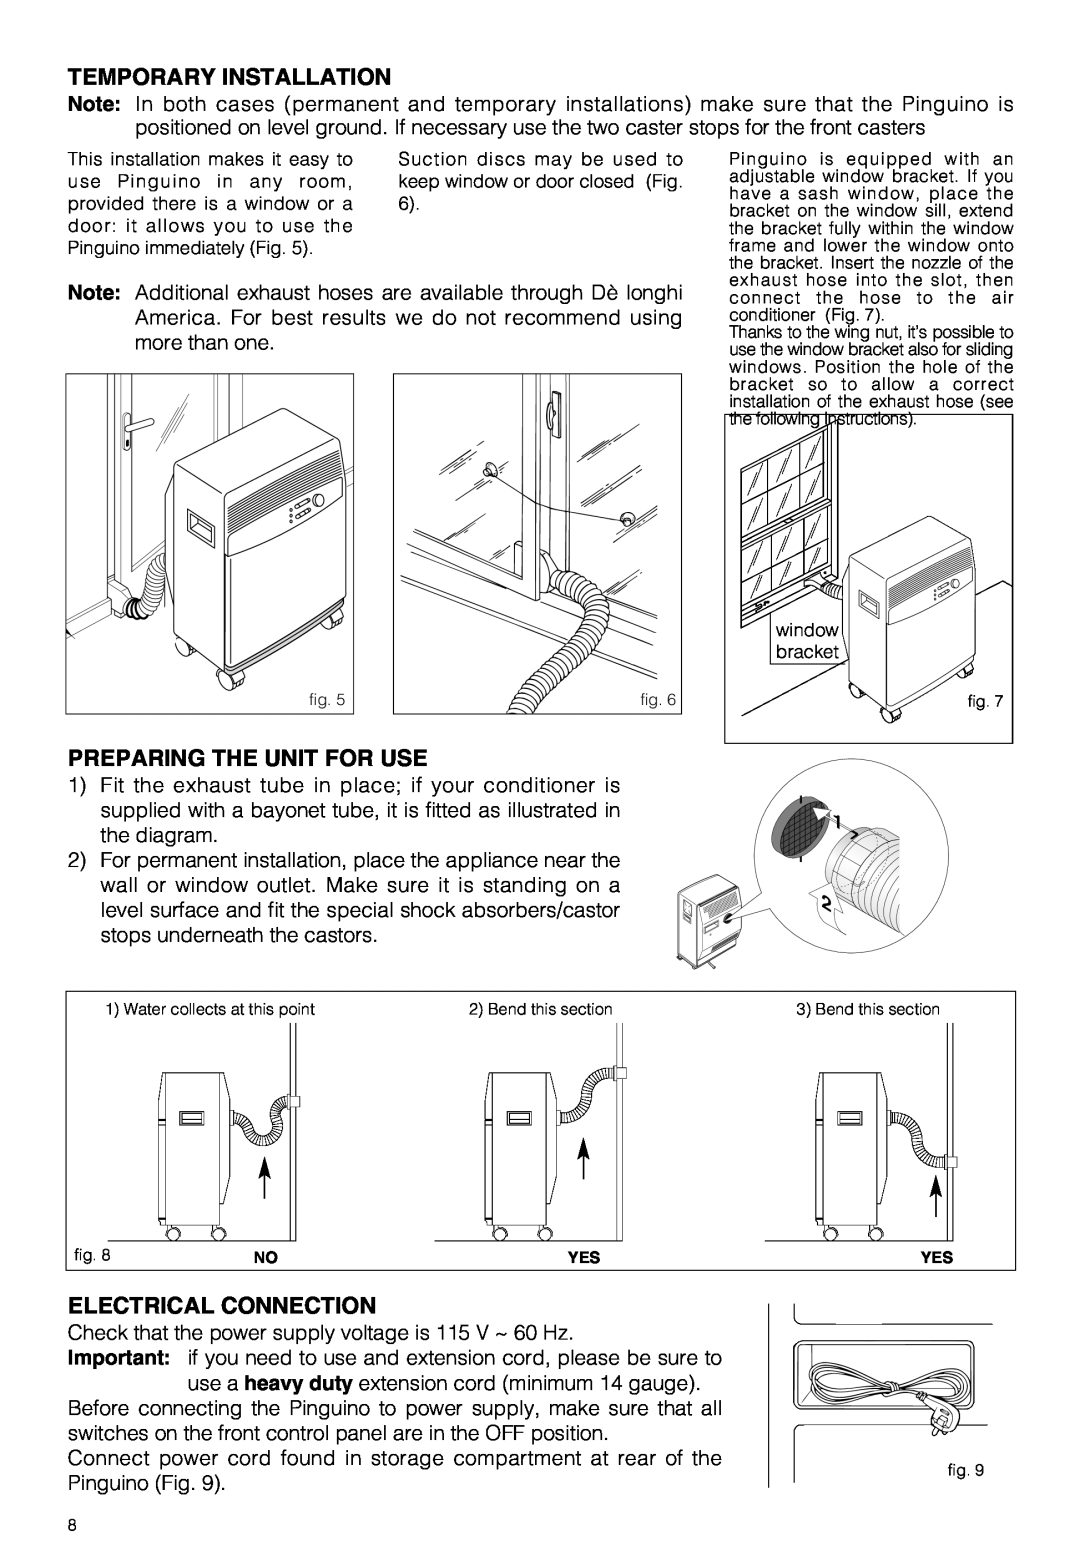 DeLonghi PAC 290 U owner manual Temporary Installation, Preparing The Unit For Use, Electrical Connection 